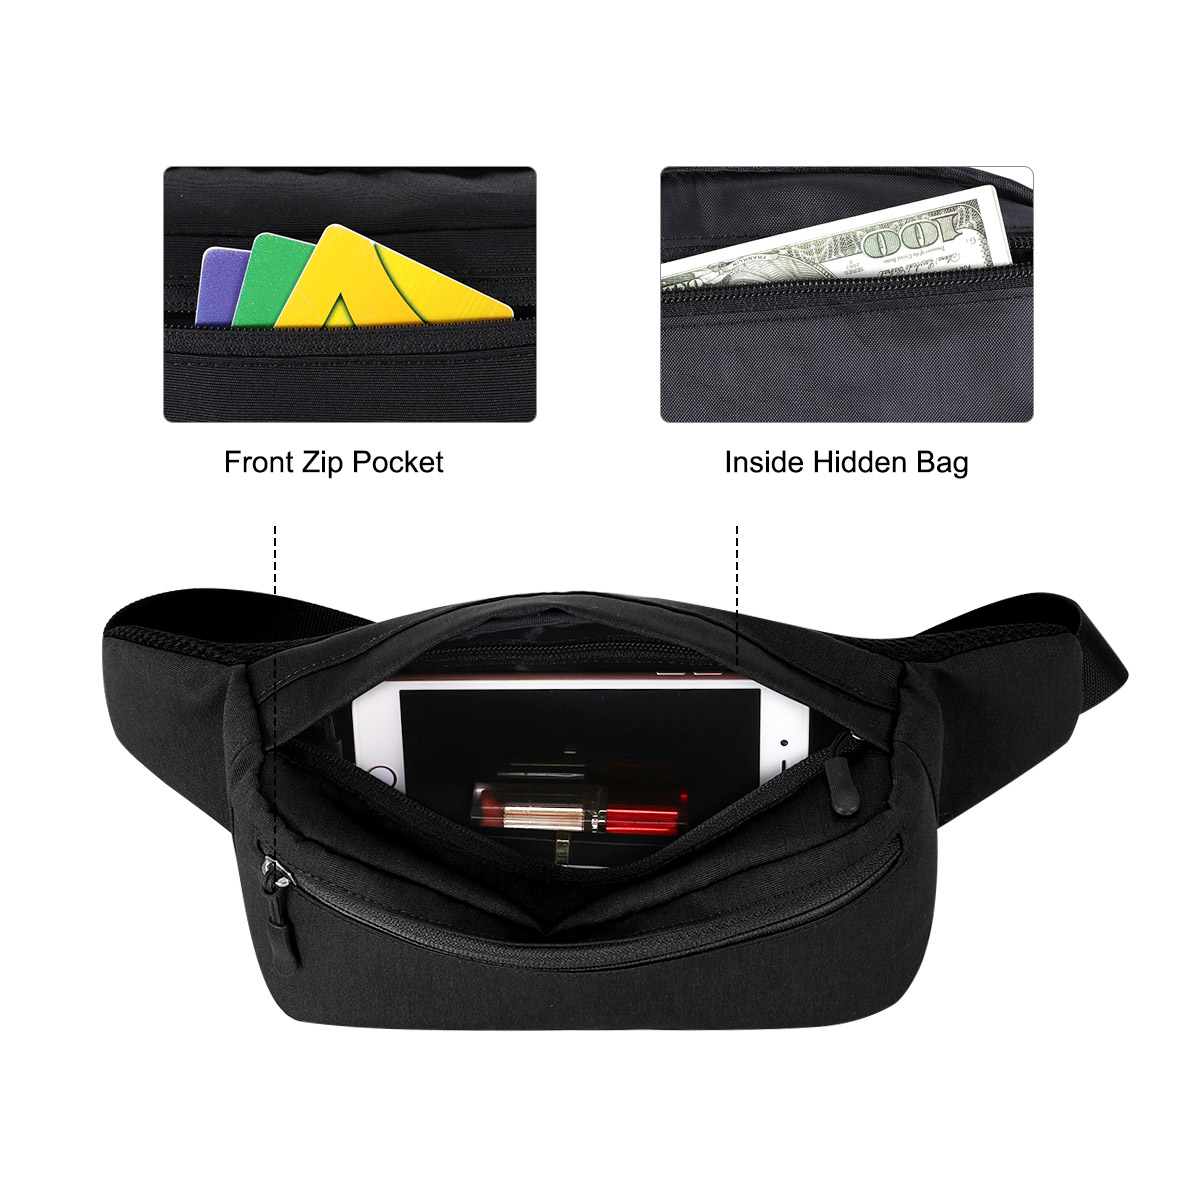 HAWEE Unisex Fanny Pack-Crossbody Sling Backpack Running Waist Pack Belt Hip Bag for Travel Sport Hiking Cycling - image 5 of 6